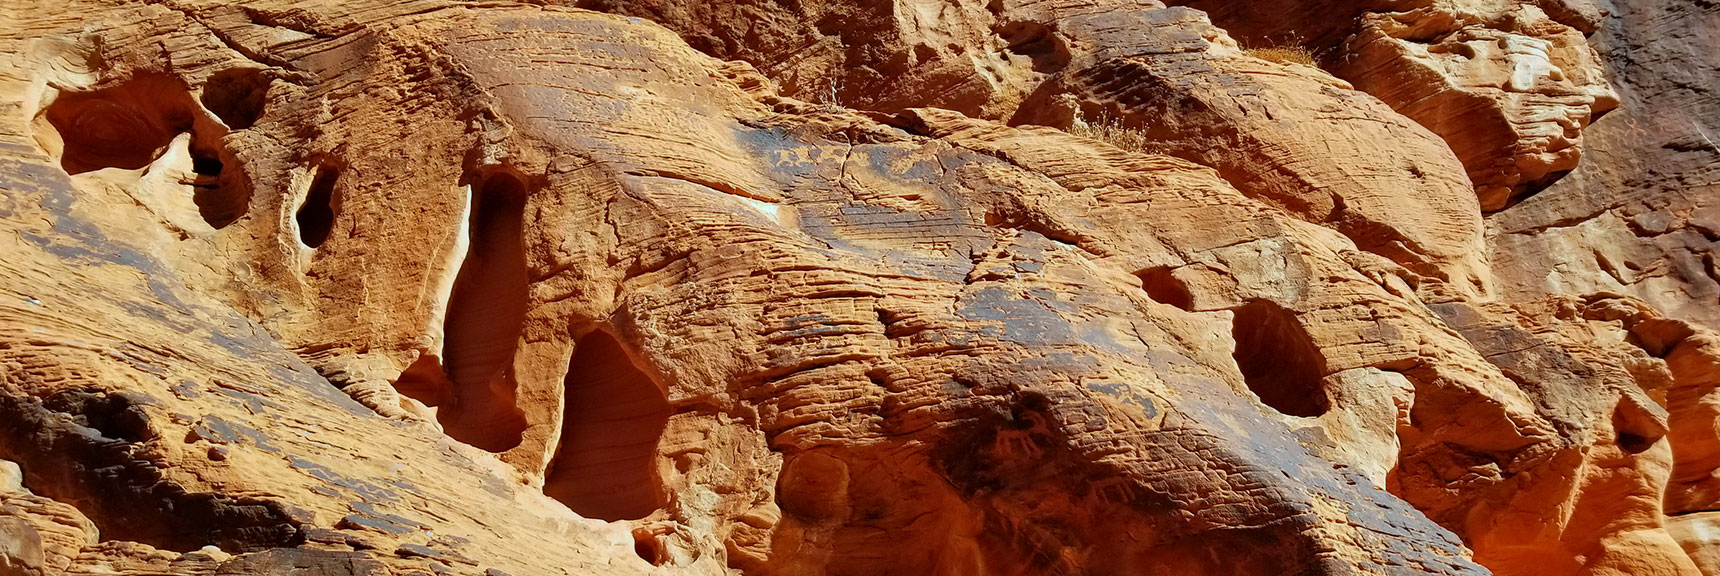 Petroglyphs on Mouse's Tank Trail in Valley of Fire State Park, Nevada, Slide 19